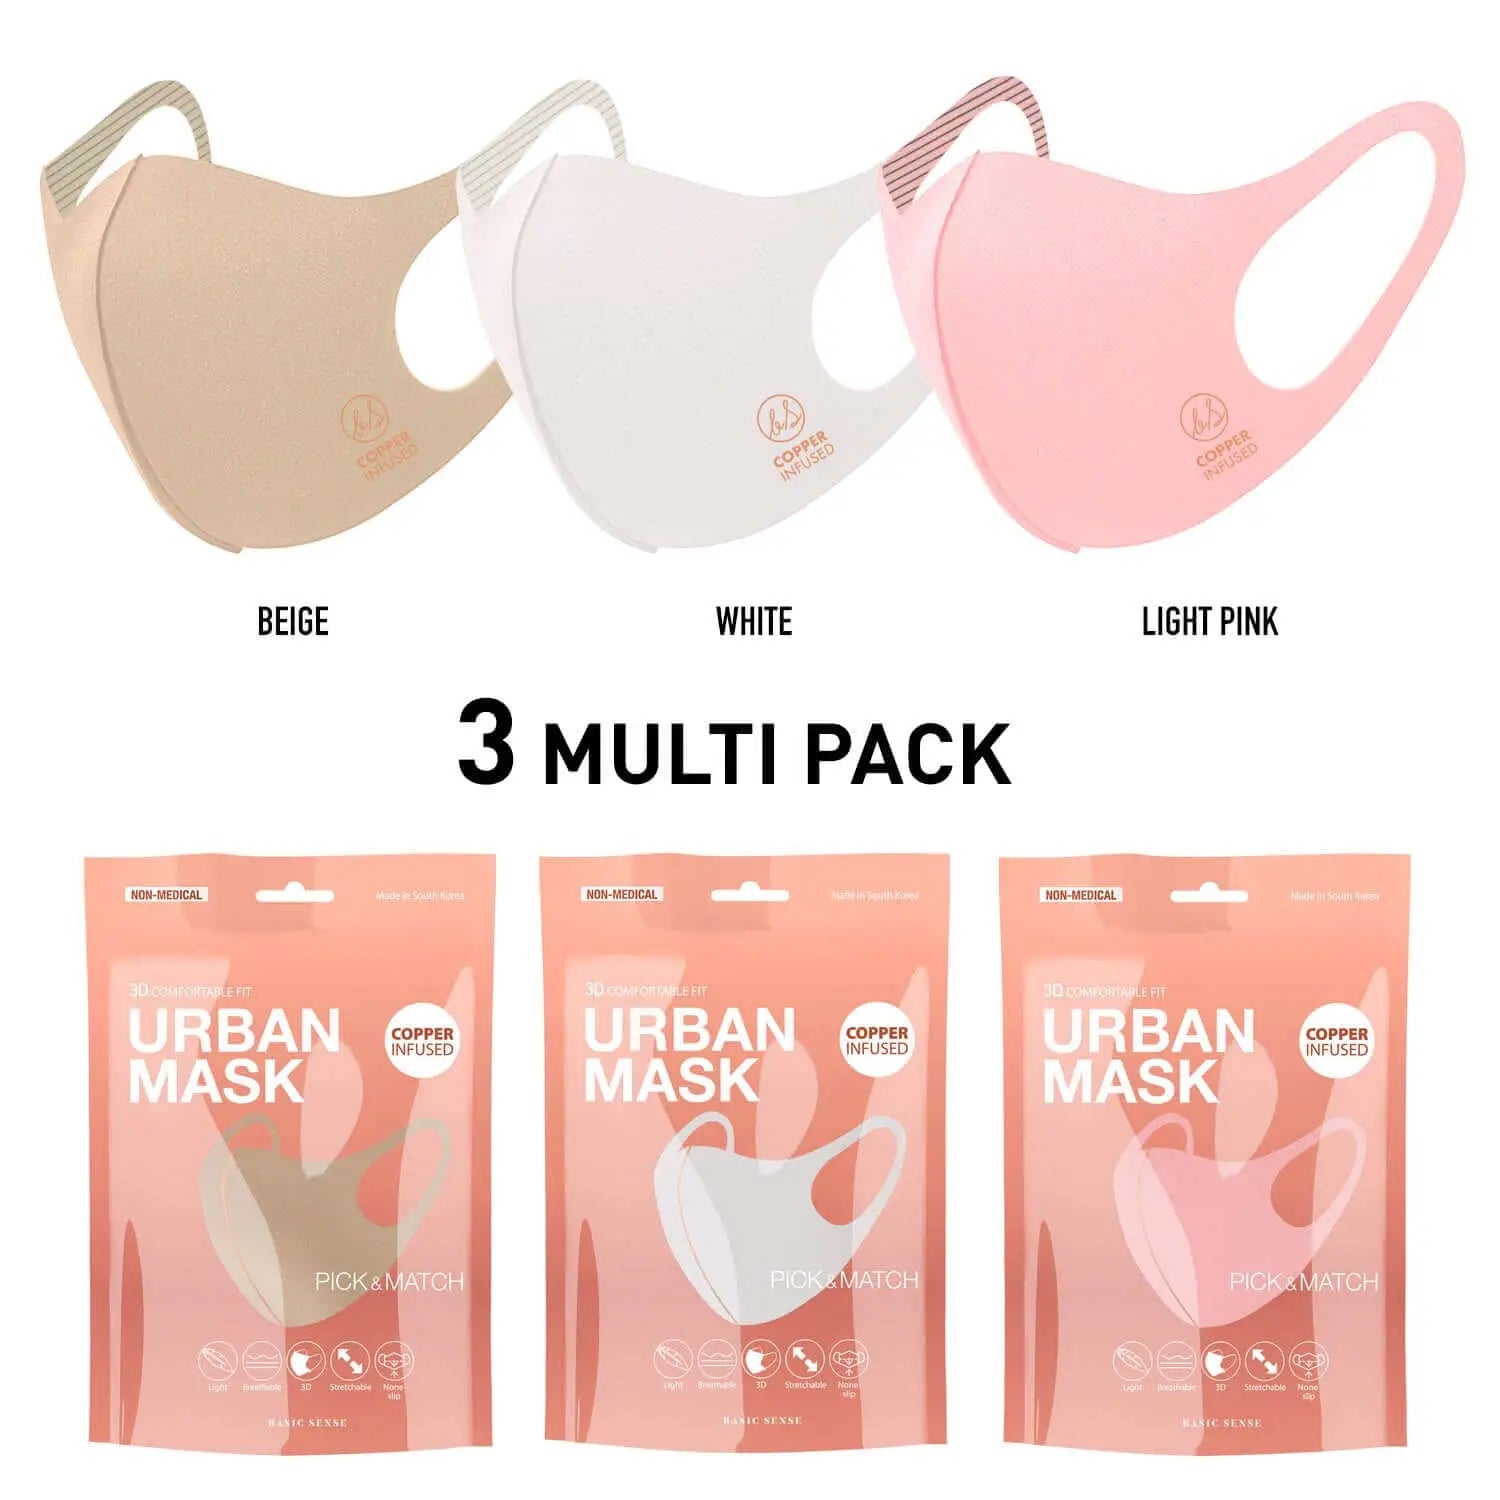 3 pack of 3 masks with 3 different colors from 3D Copper-Infused Face Mask Covering for Stylish Protection.